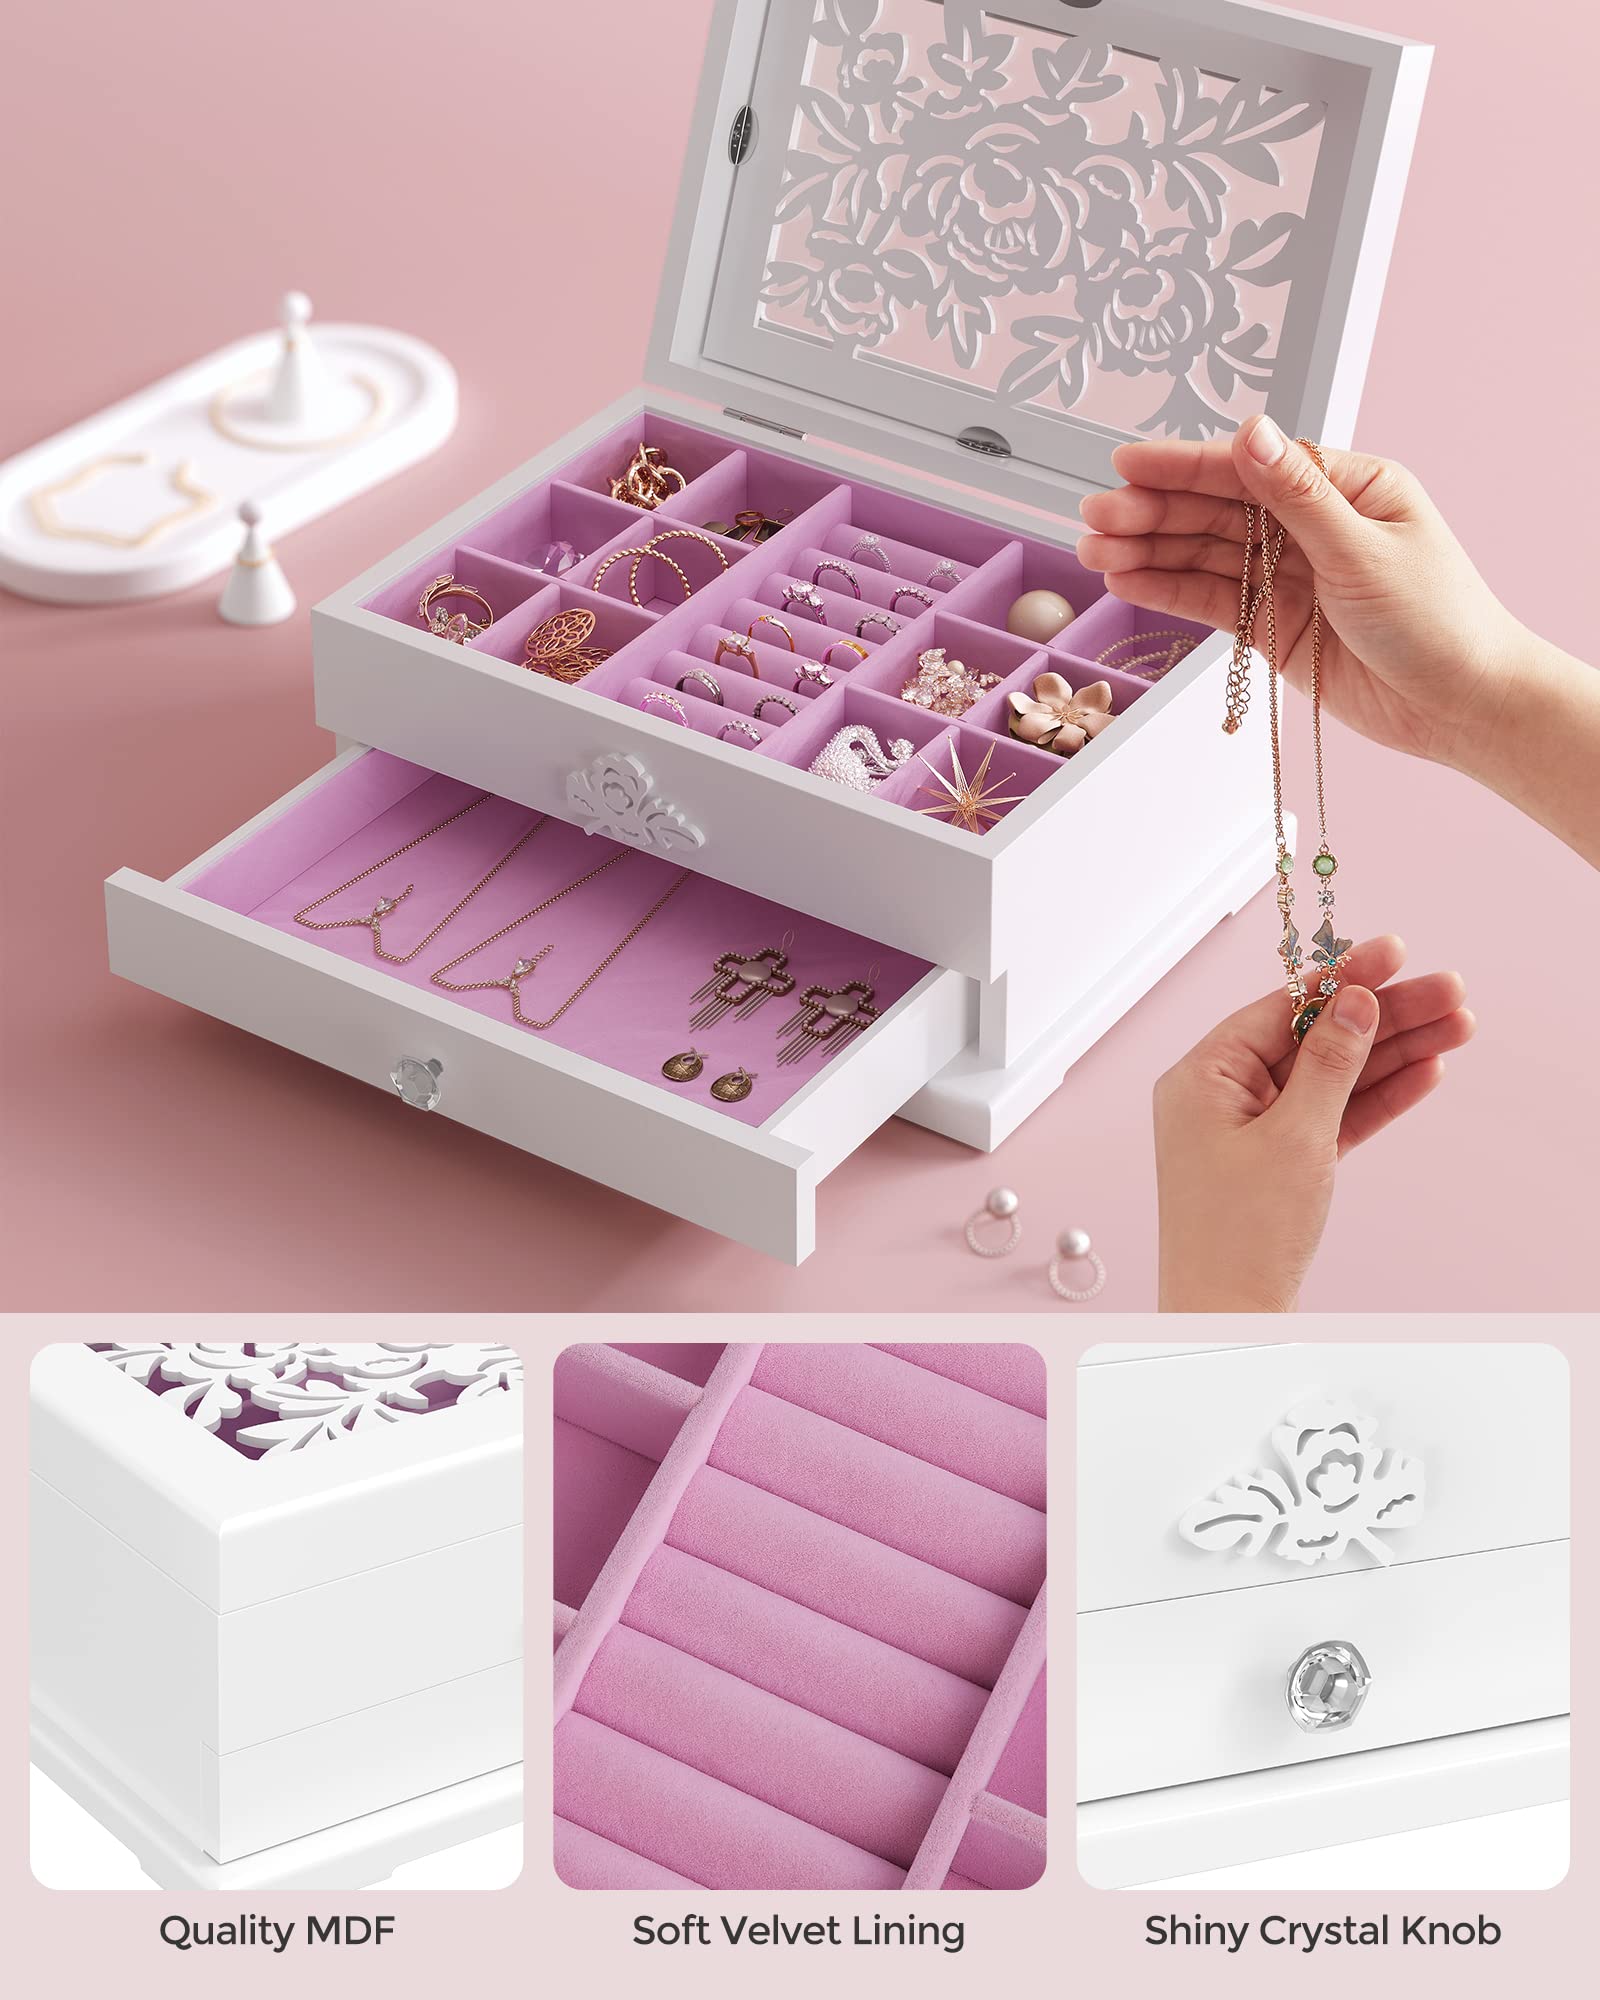 SONGMICS Jewelry Box, 2-Tier Jewelry Organizer with Flower Carvings, Drawer, Gift for Loved Ones, Kids, Jewelry Storage Case for Rings, Earrings, Necklaces, Bracelets, White UJOW201